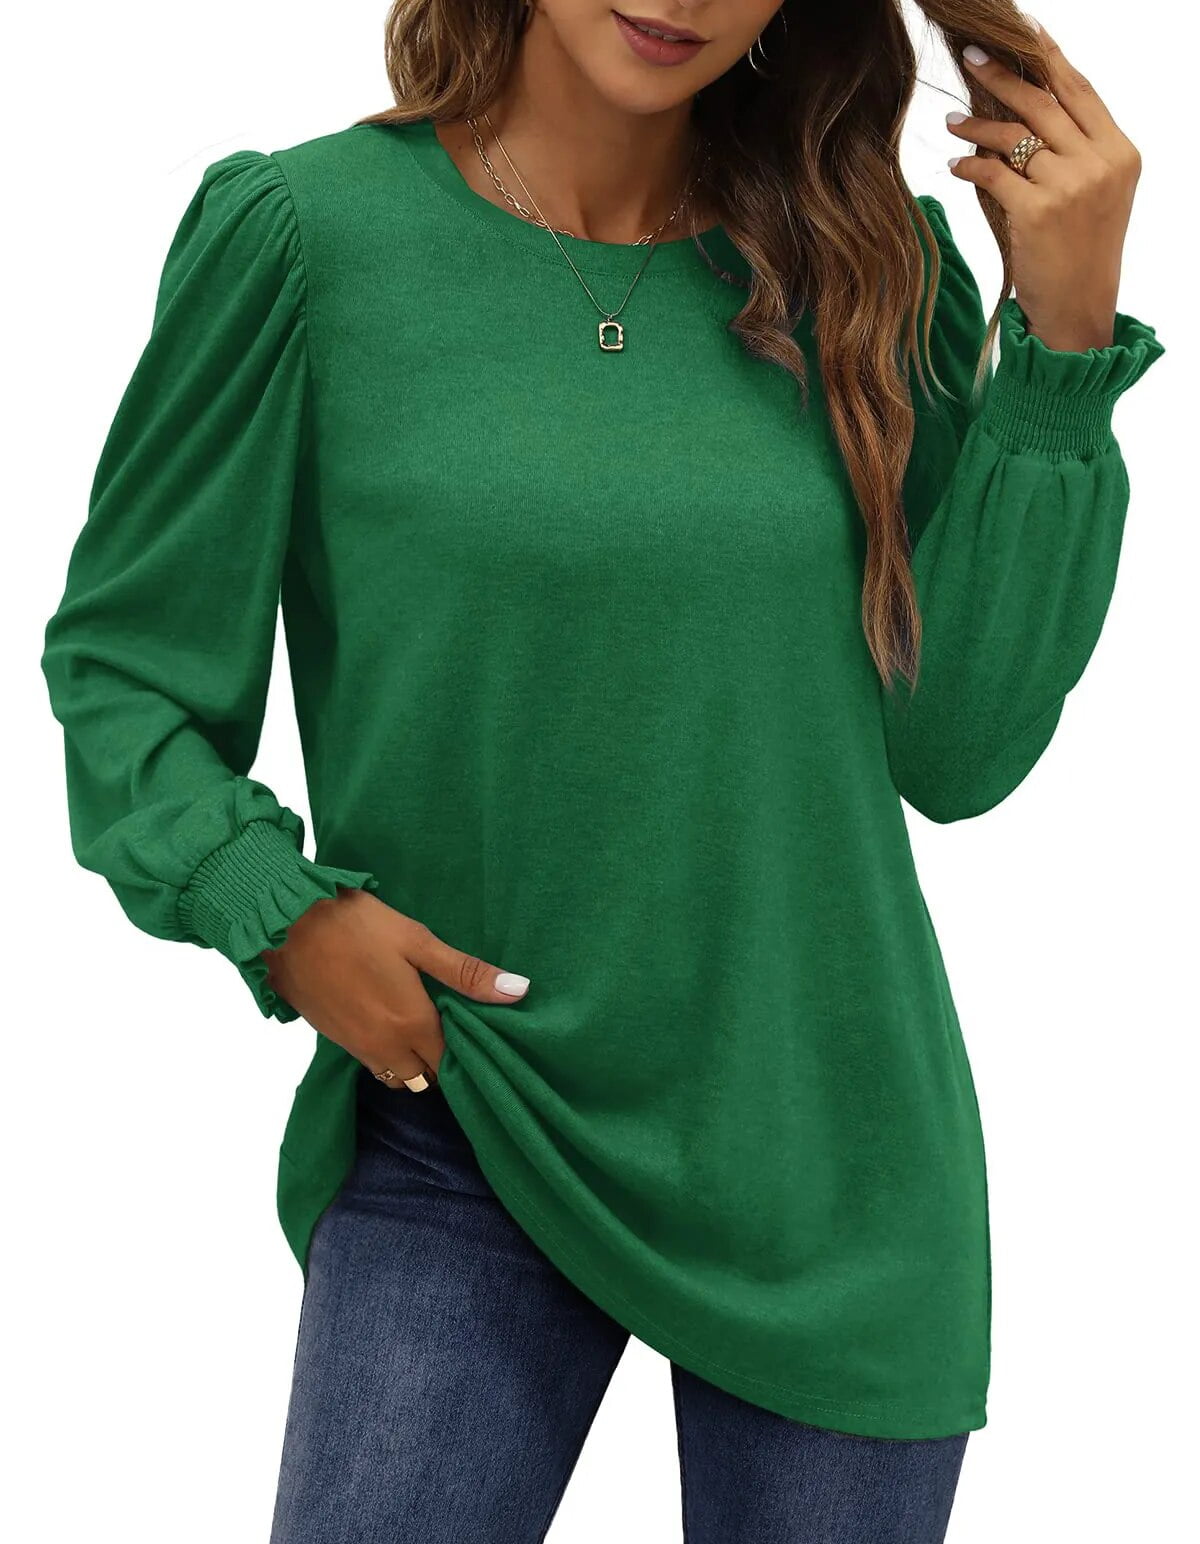 Fantaslook Blouses for Women Dressy Puff Sleeve Tunic Tops Casual